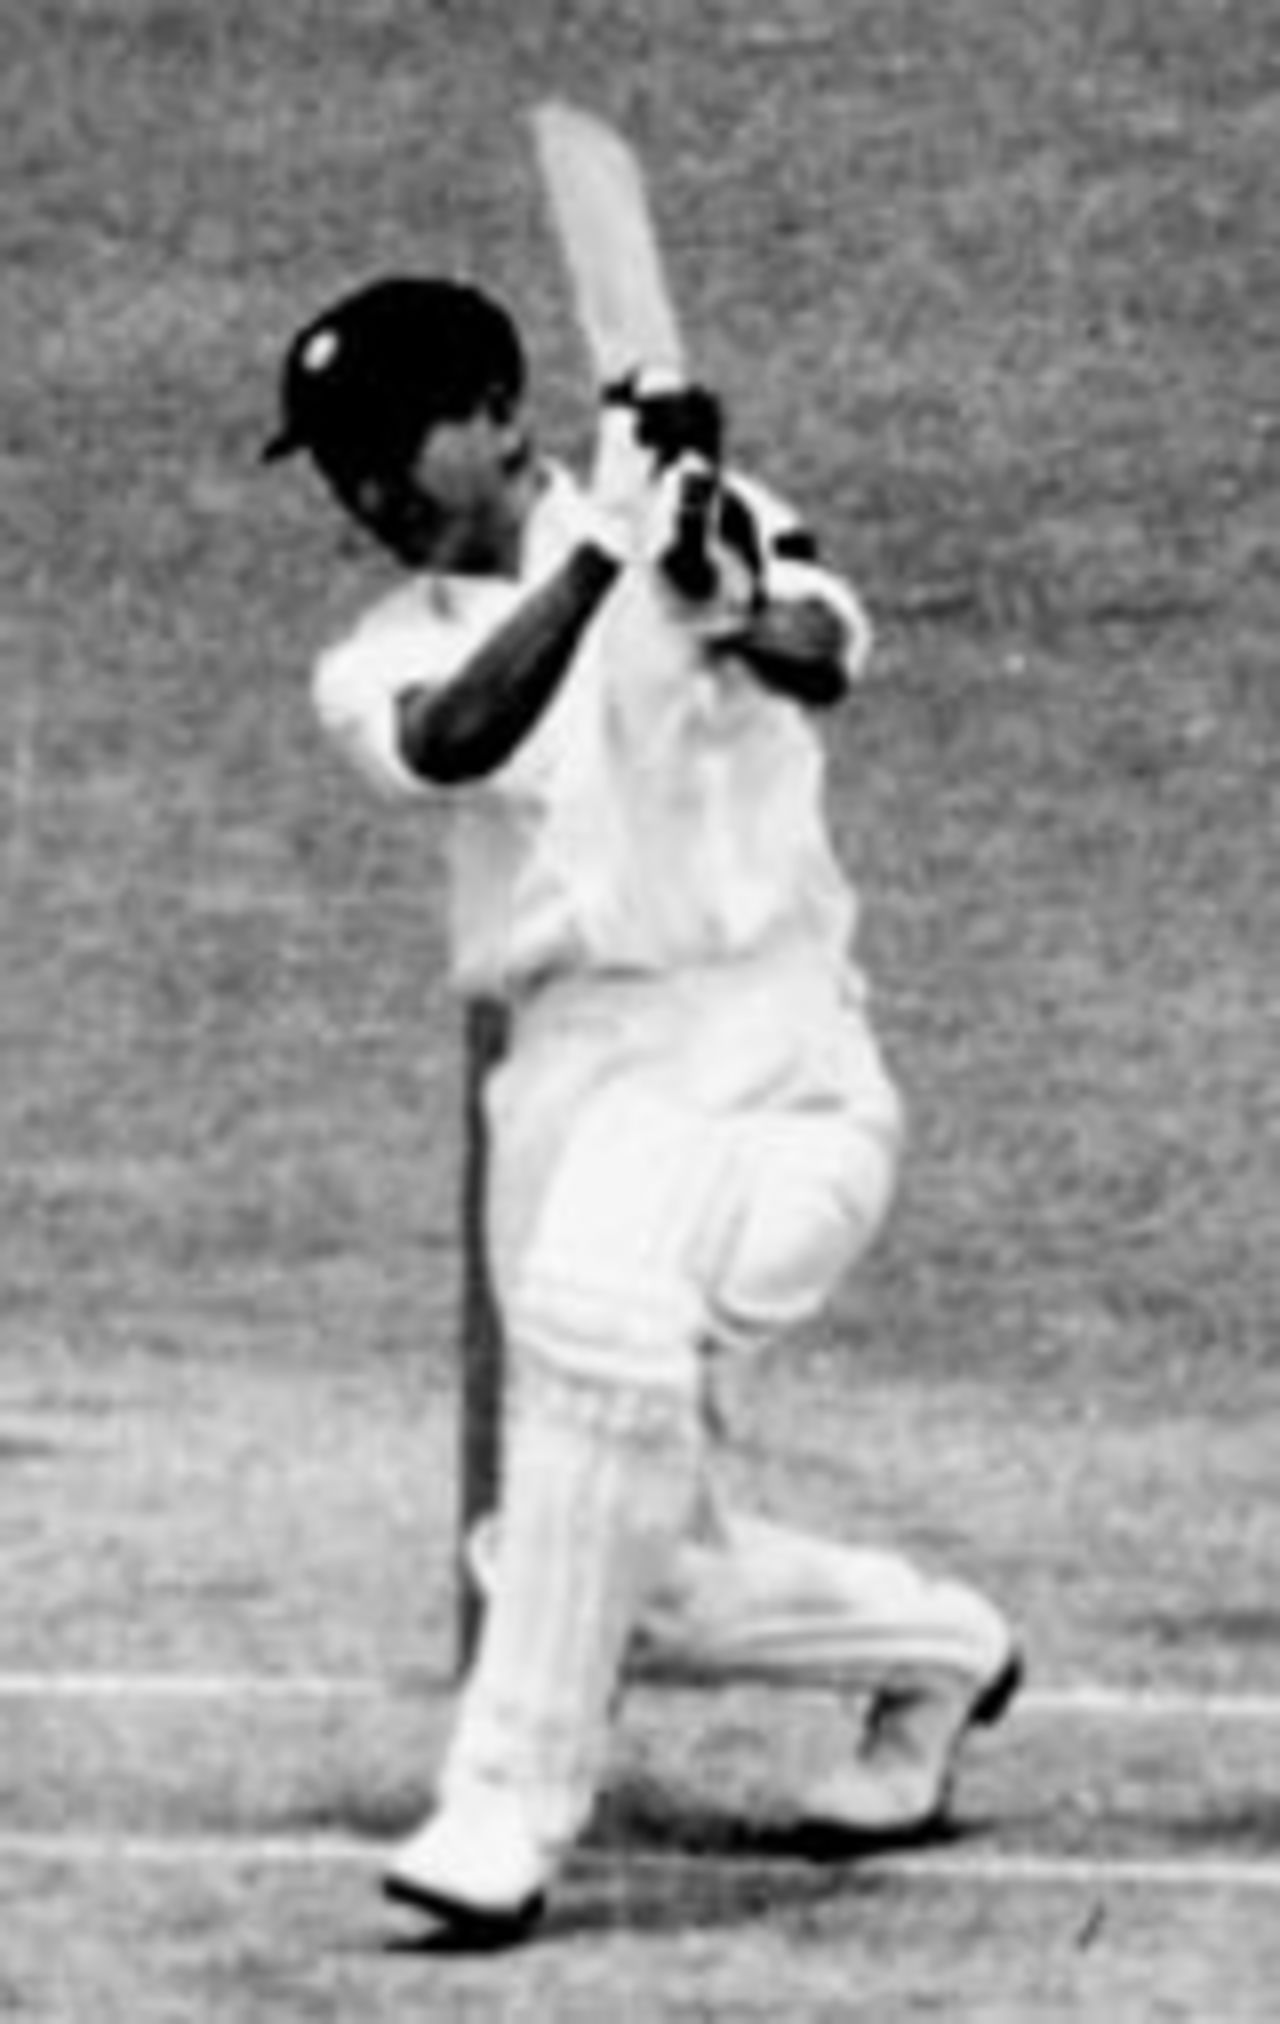 Vijay Hazare plays the cover-drive during the 1947-48 tour to Australia